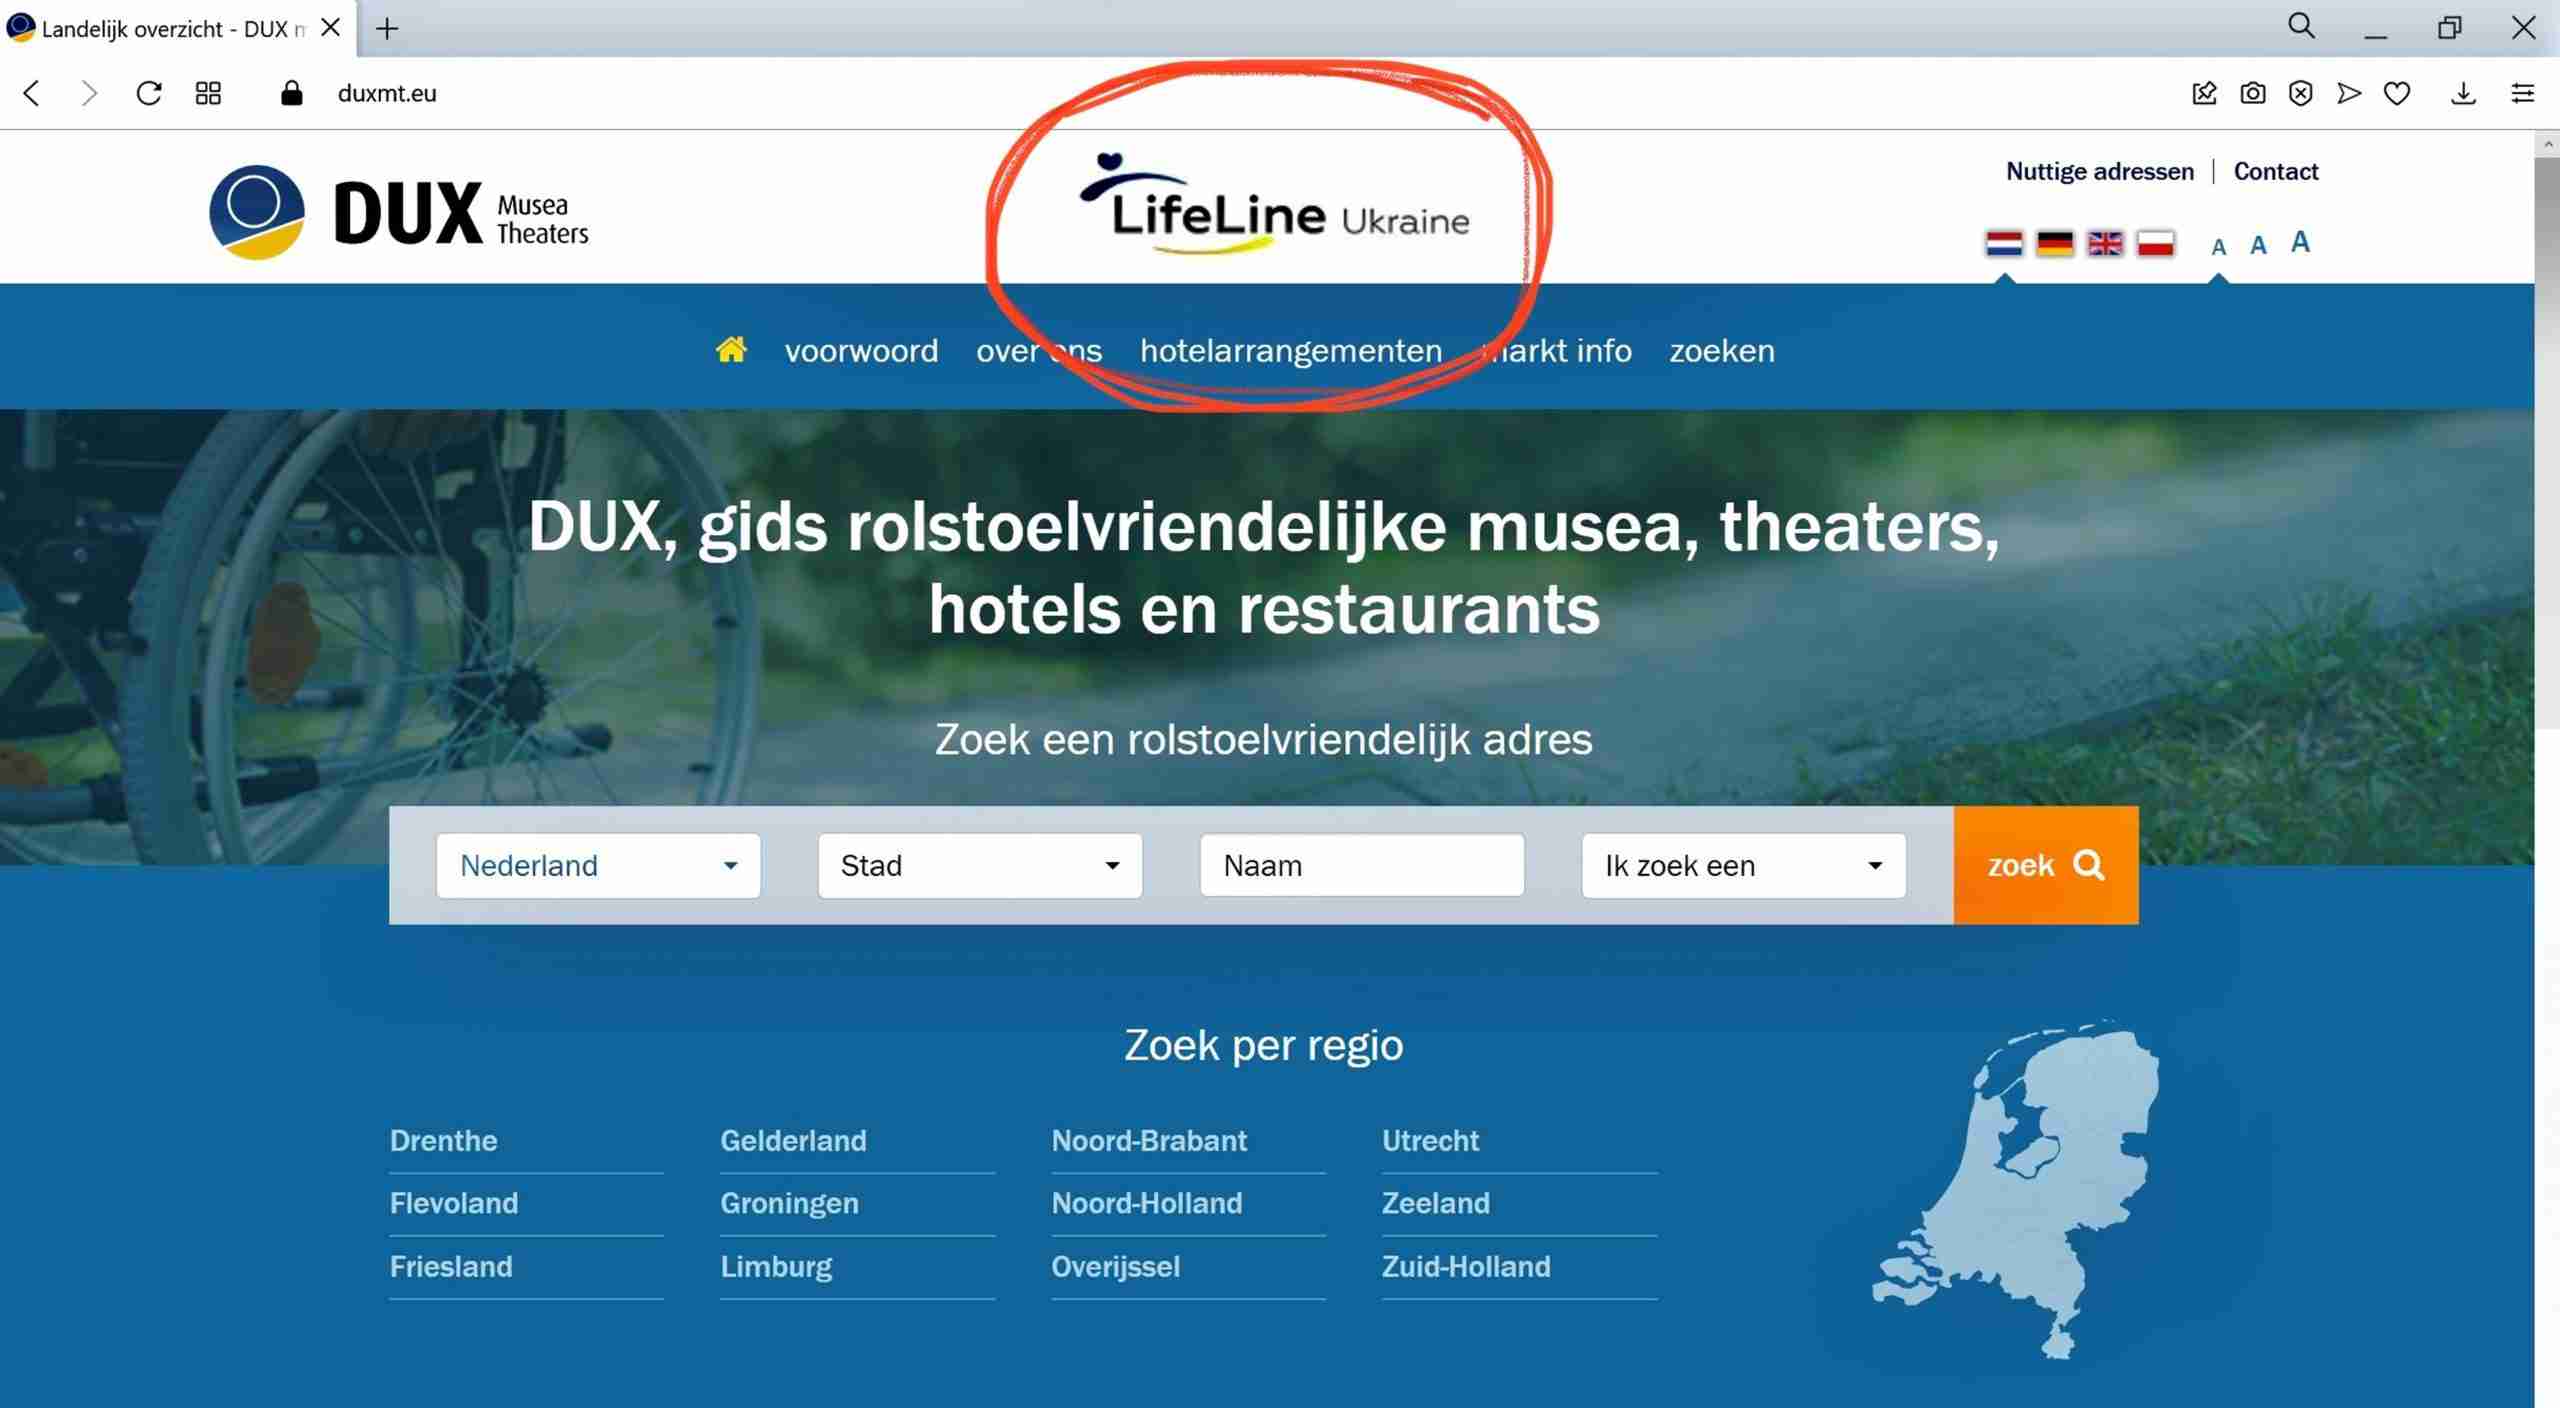 Another great way to help, is by sharing information about LifeLine Ukraine. After hearing our BNR interview, John Faber of DUXMT decided to help us by placing our banner on their website. Thank you, John!